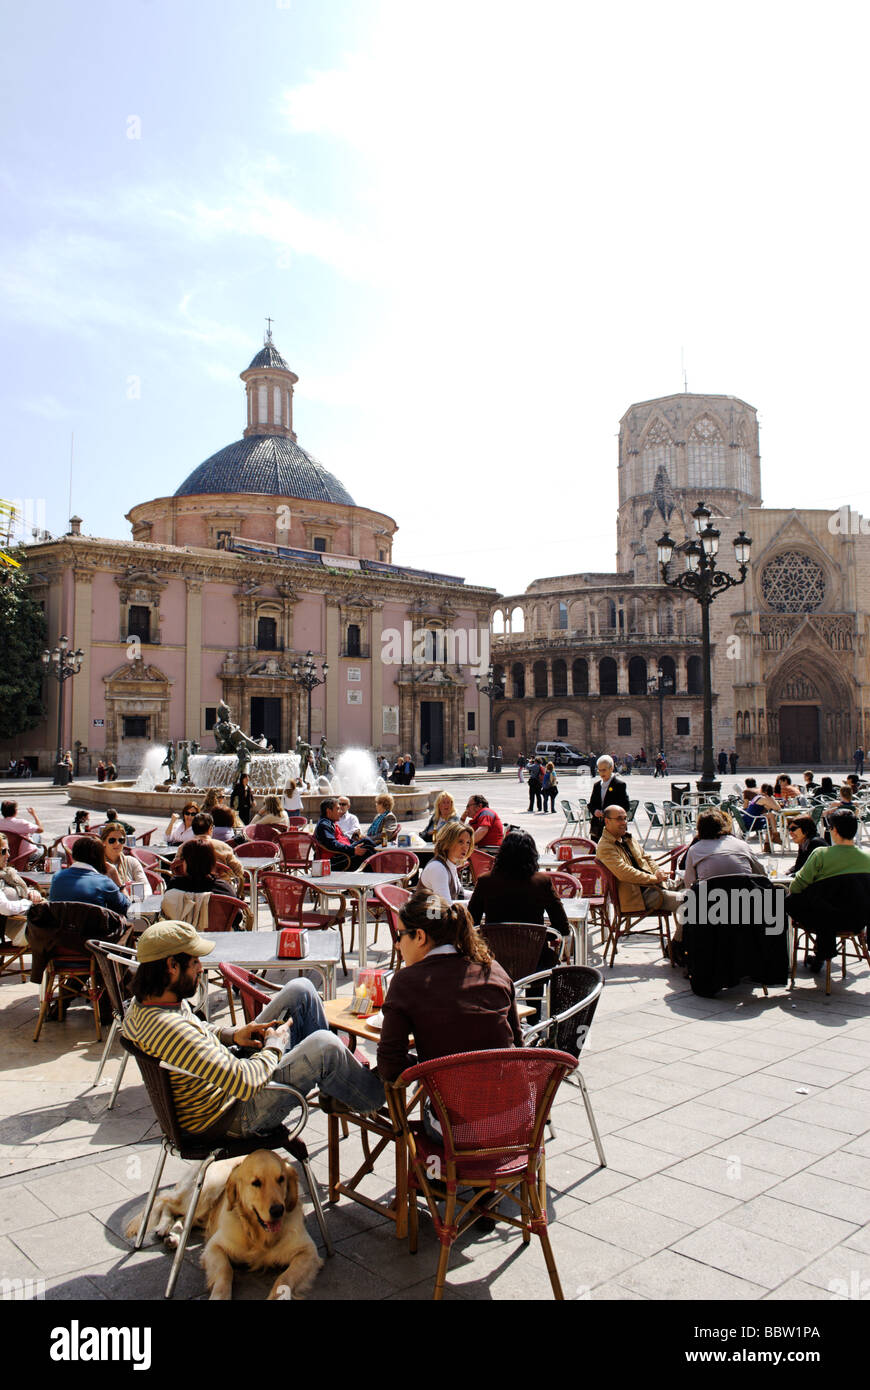 People sitting in cafe terrace in front of the cathedral on Plaza de la Virgen in central Valencia Spain Stock Photo